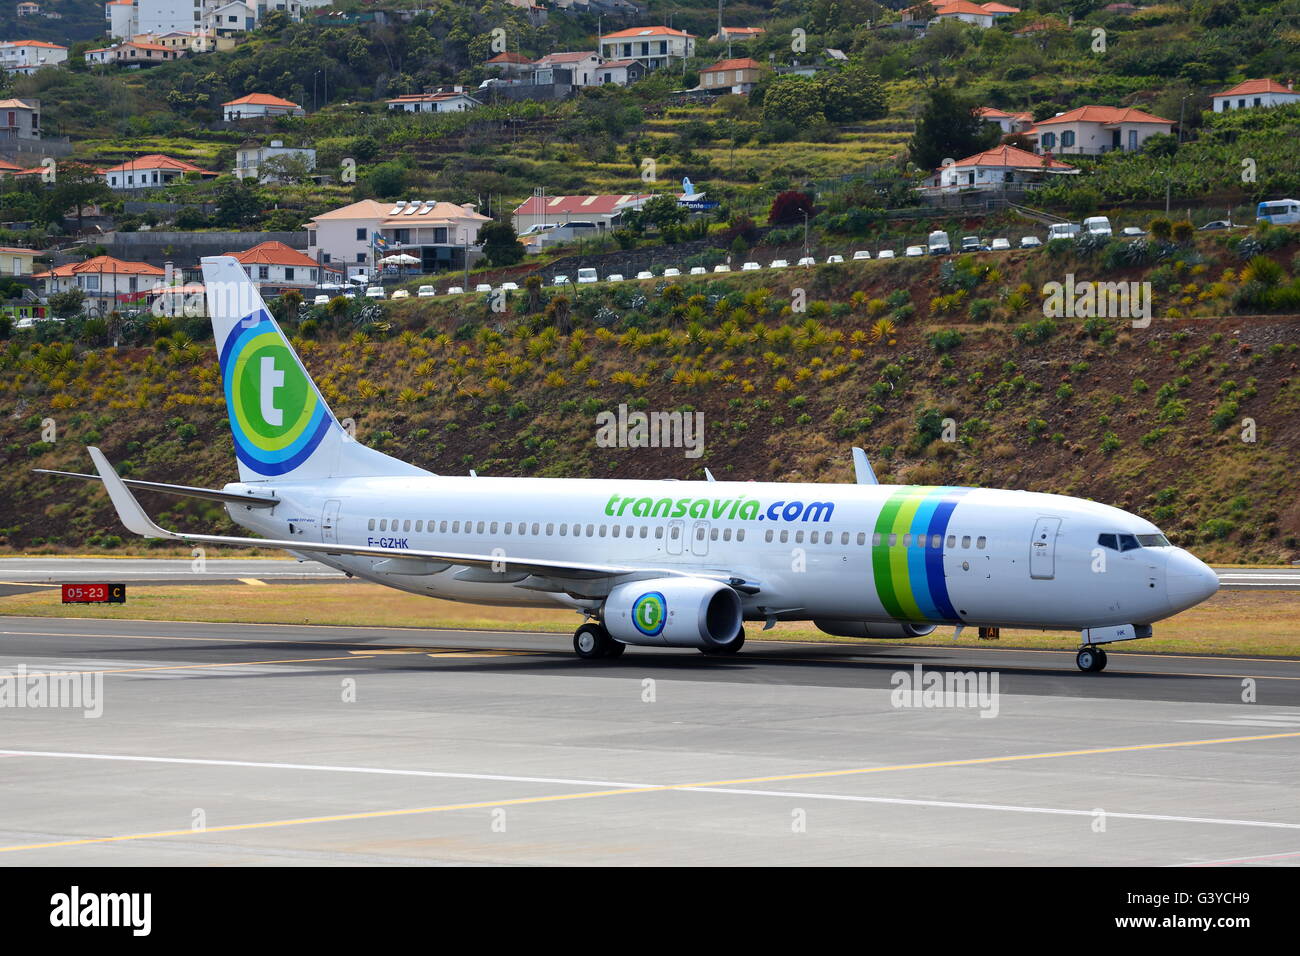 Transavia France Boeing 737-800 F-GZHK arriving at Funchal Airport,  Madeira, Portugal Stock Photo - Alamy